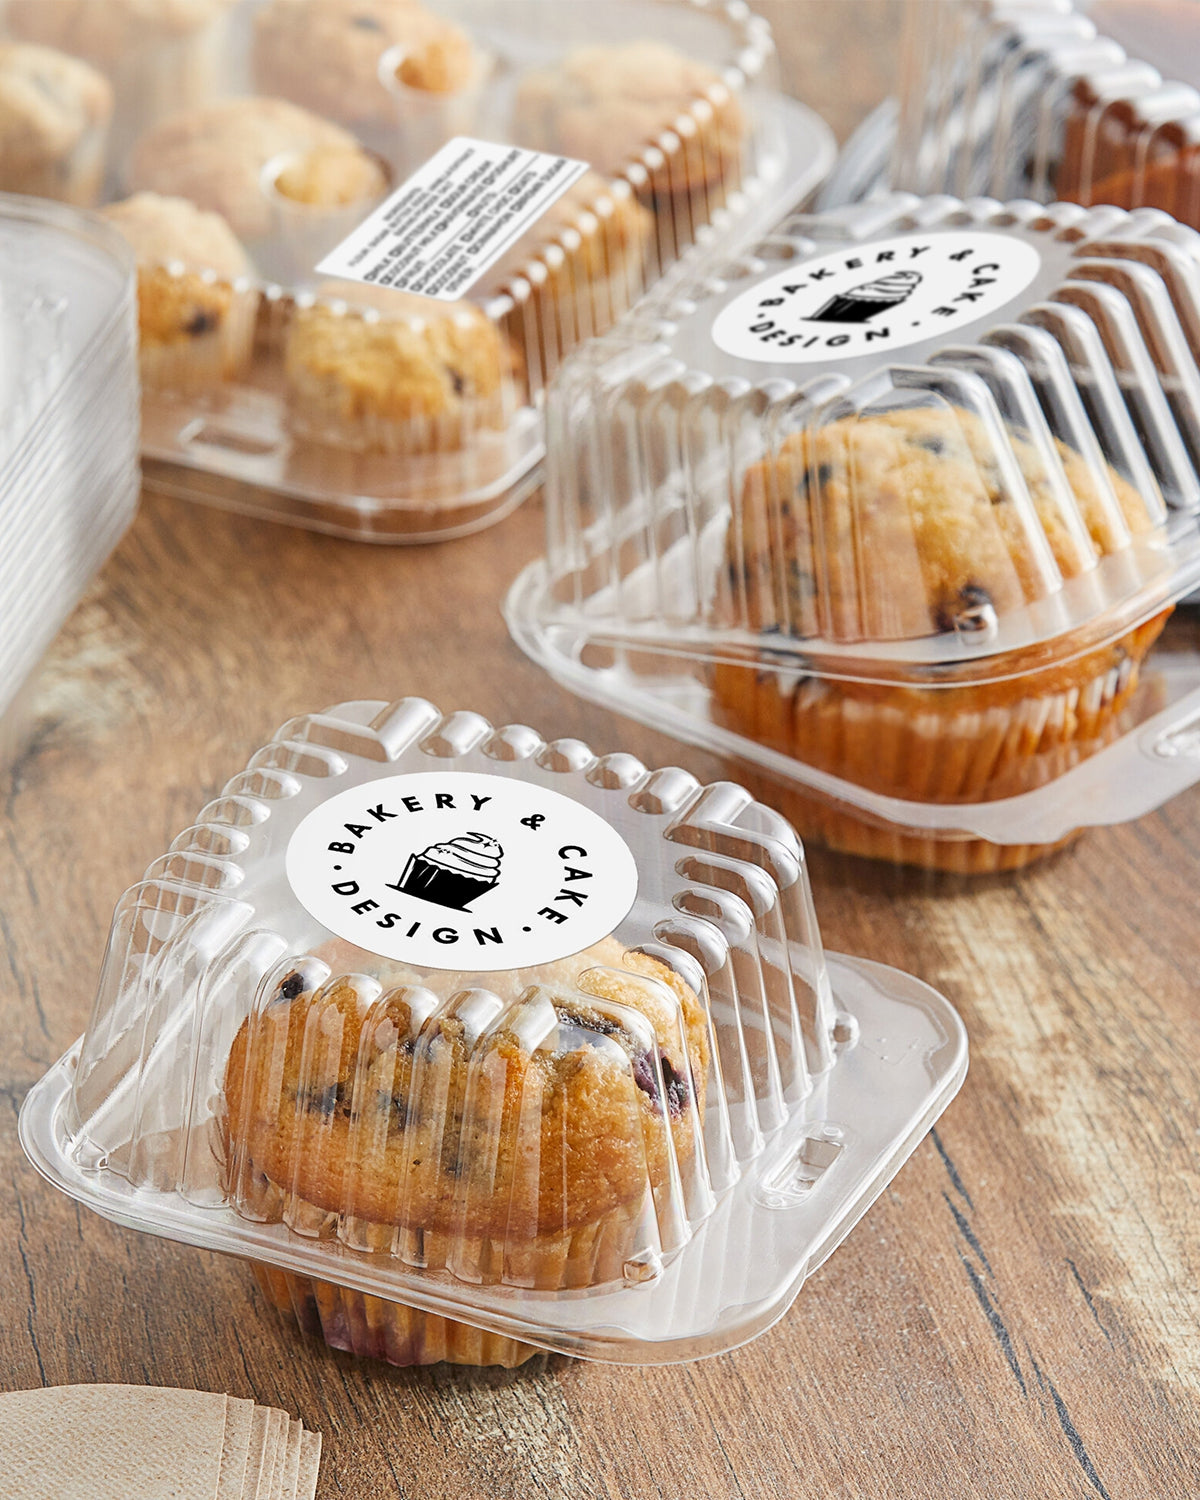 MUNBYN circle labels can be used to label cupcakes as brand labels.